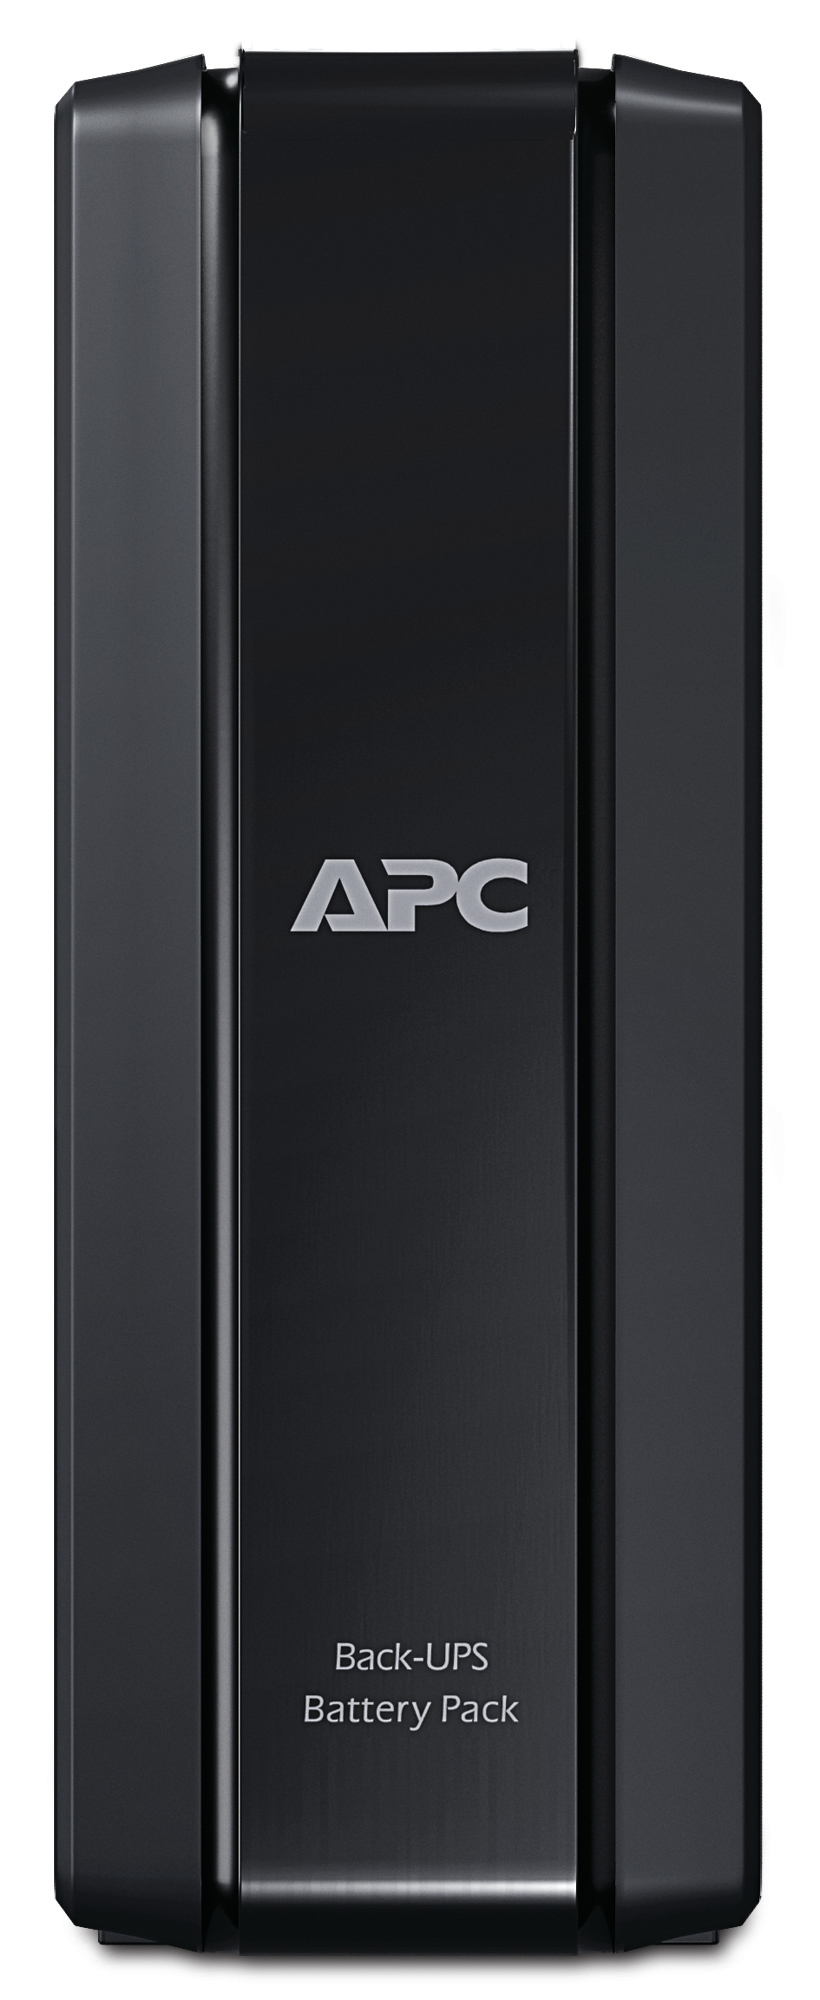 apc back-ups pro 1500 battery replacement instructions